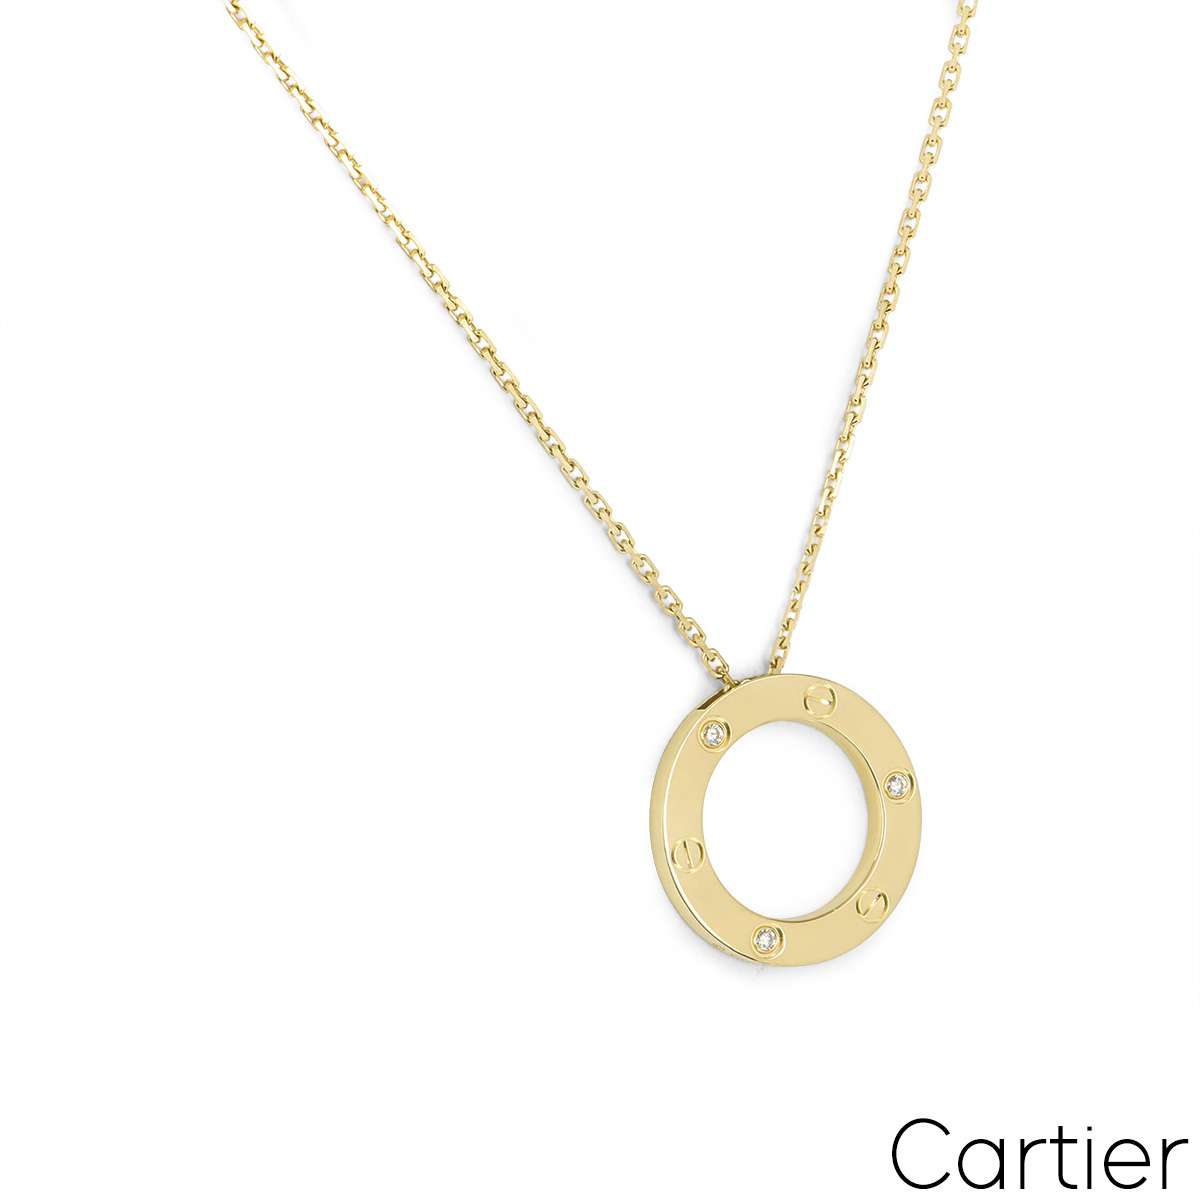 18k Yellow Gold and Diamond Cartier Love Necklace. B7014500